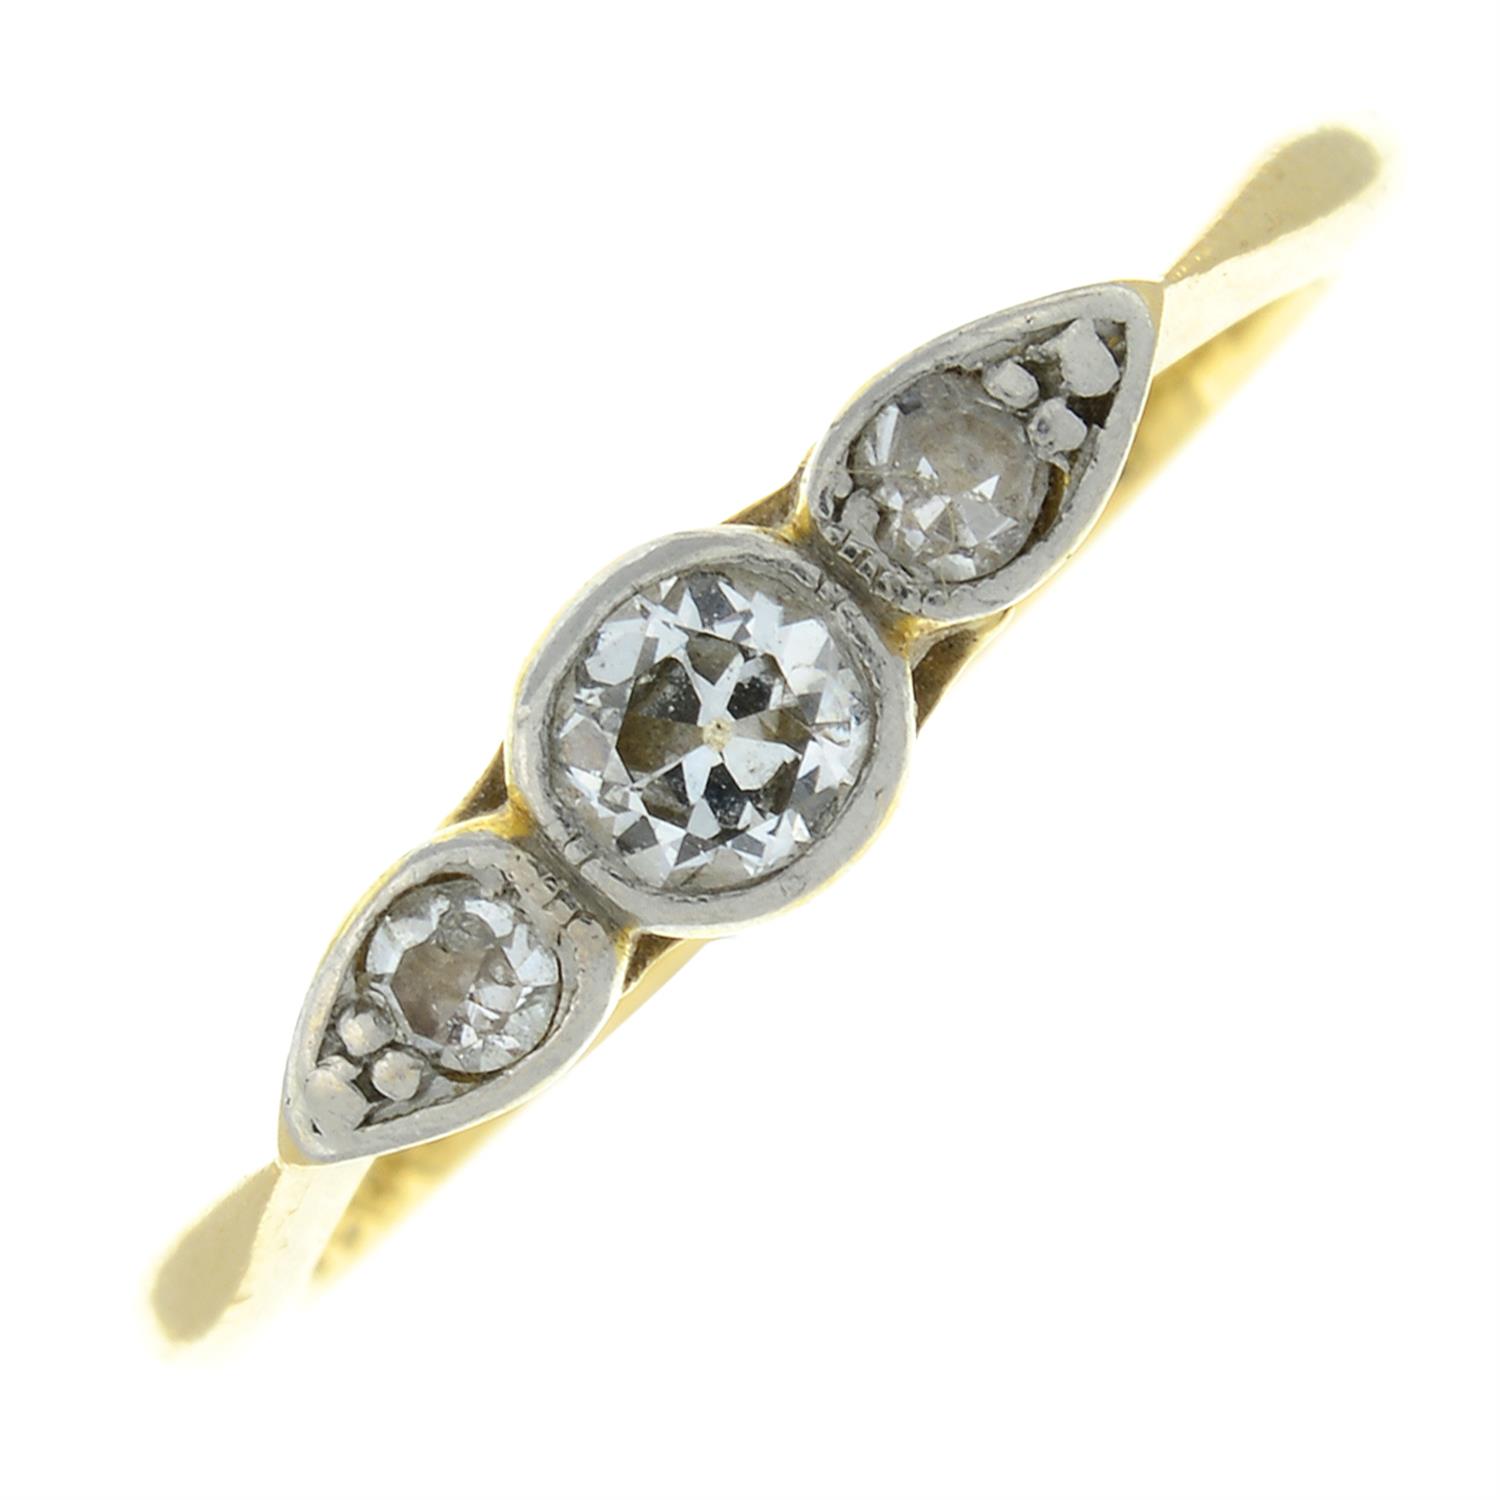 An early 20th century 18ct gold and platinum old-cut diamond three-stone ring.